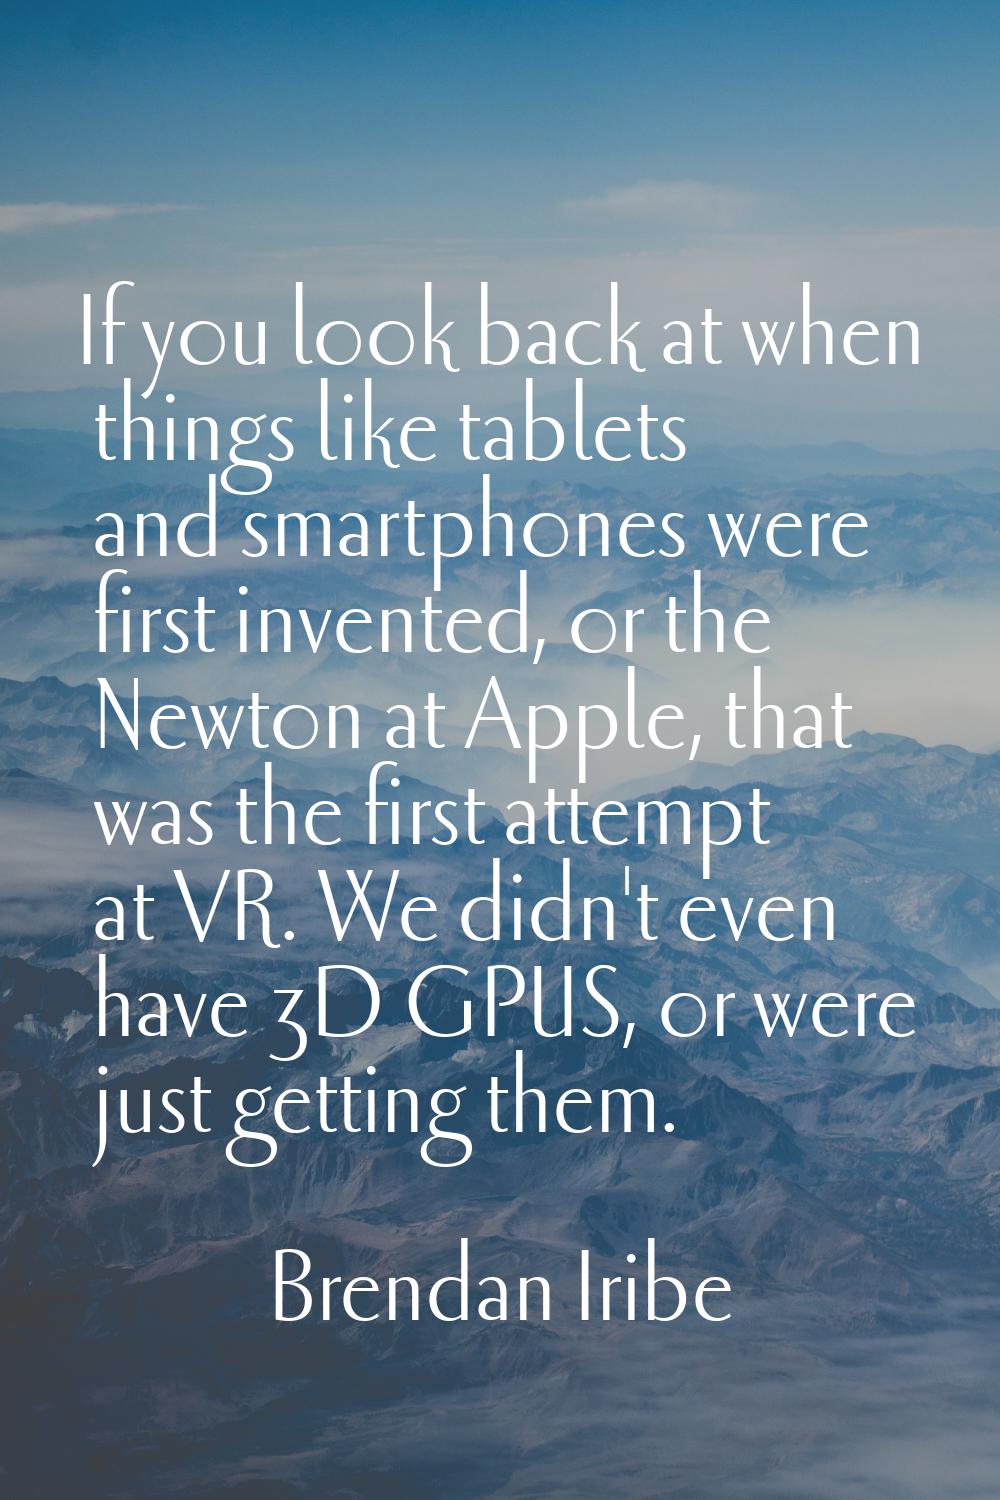 If you look back at when things like tablets and smartphones were first invented, or the Newton at 